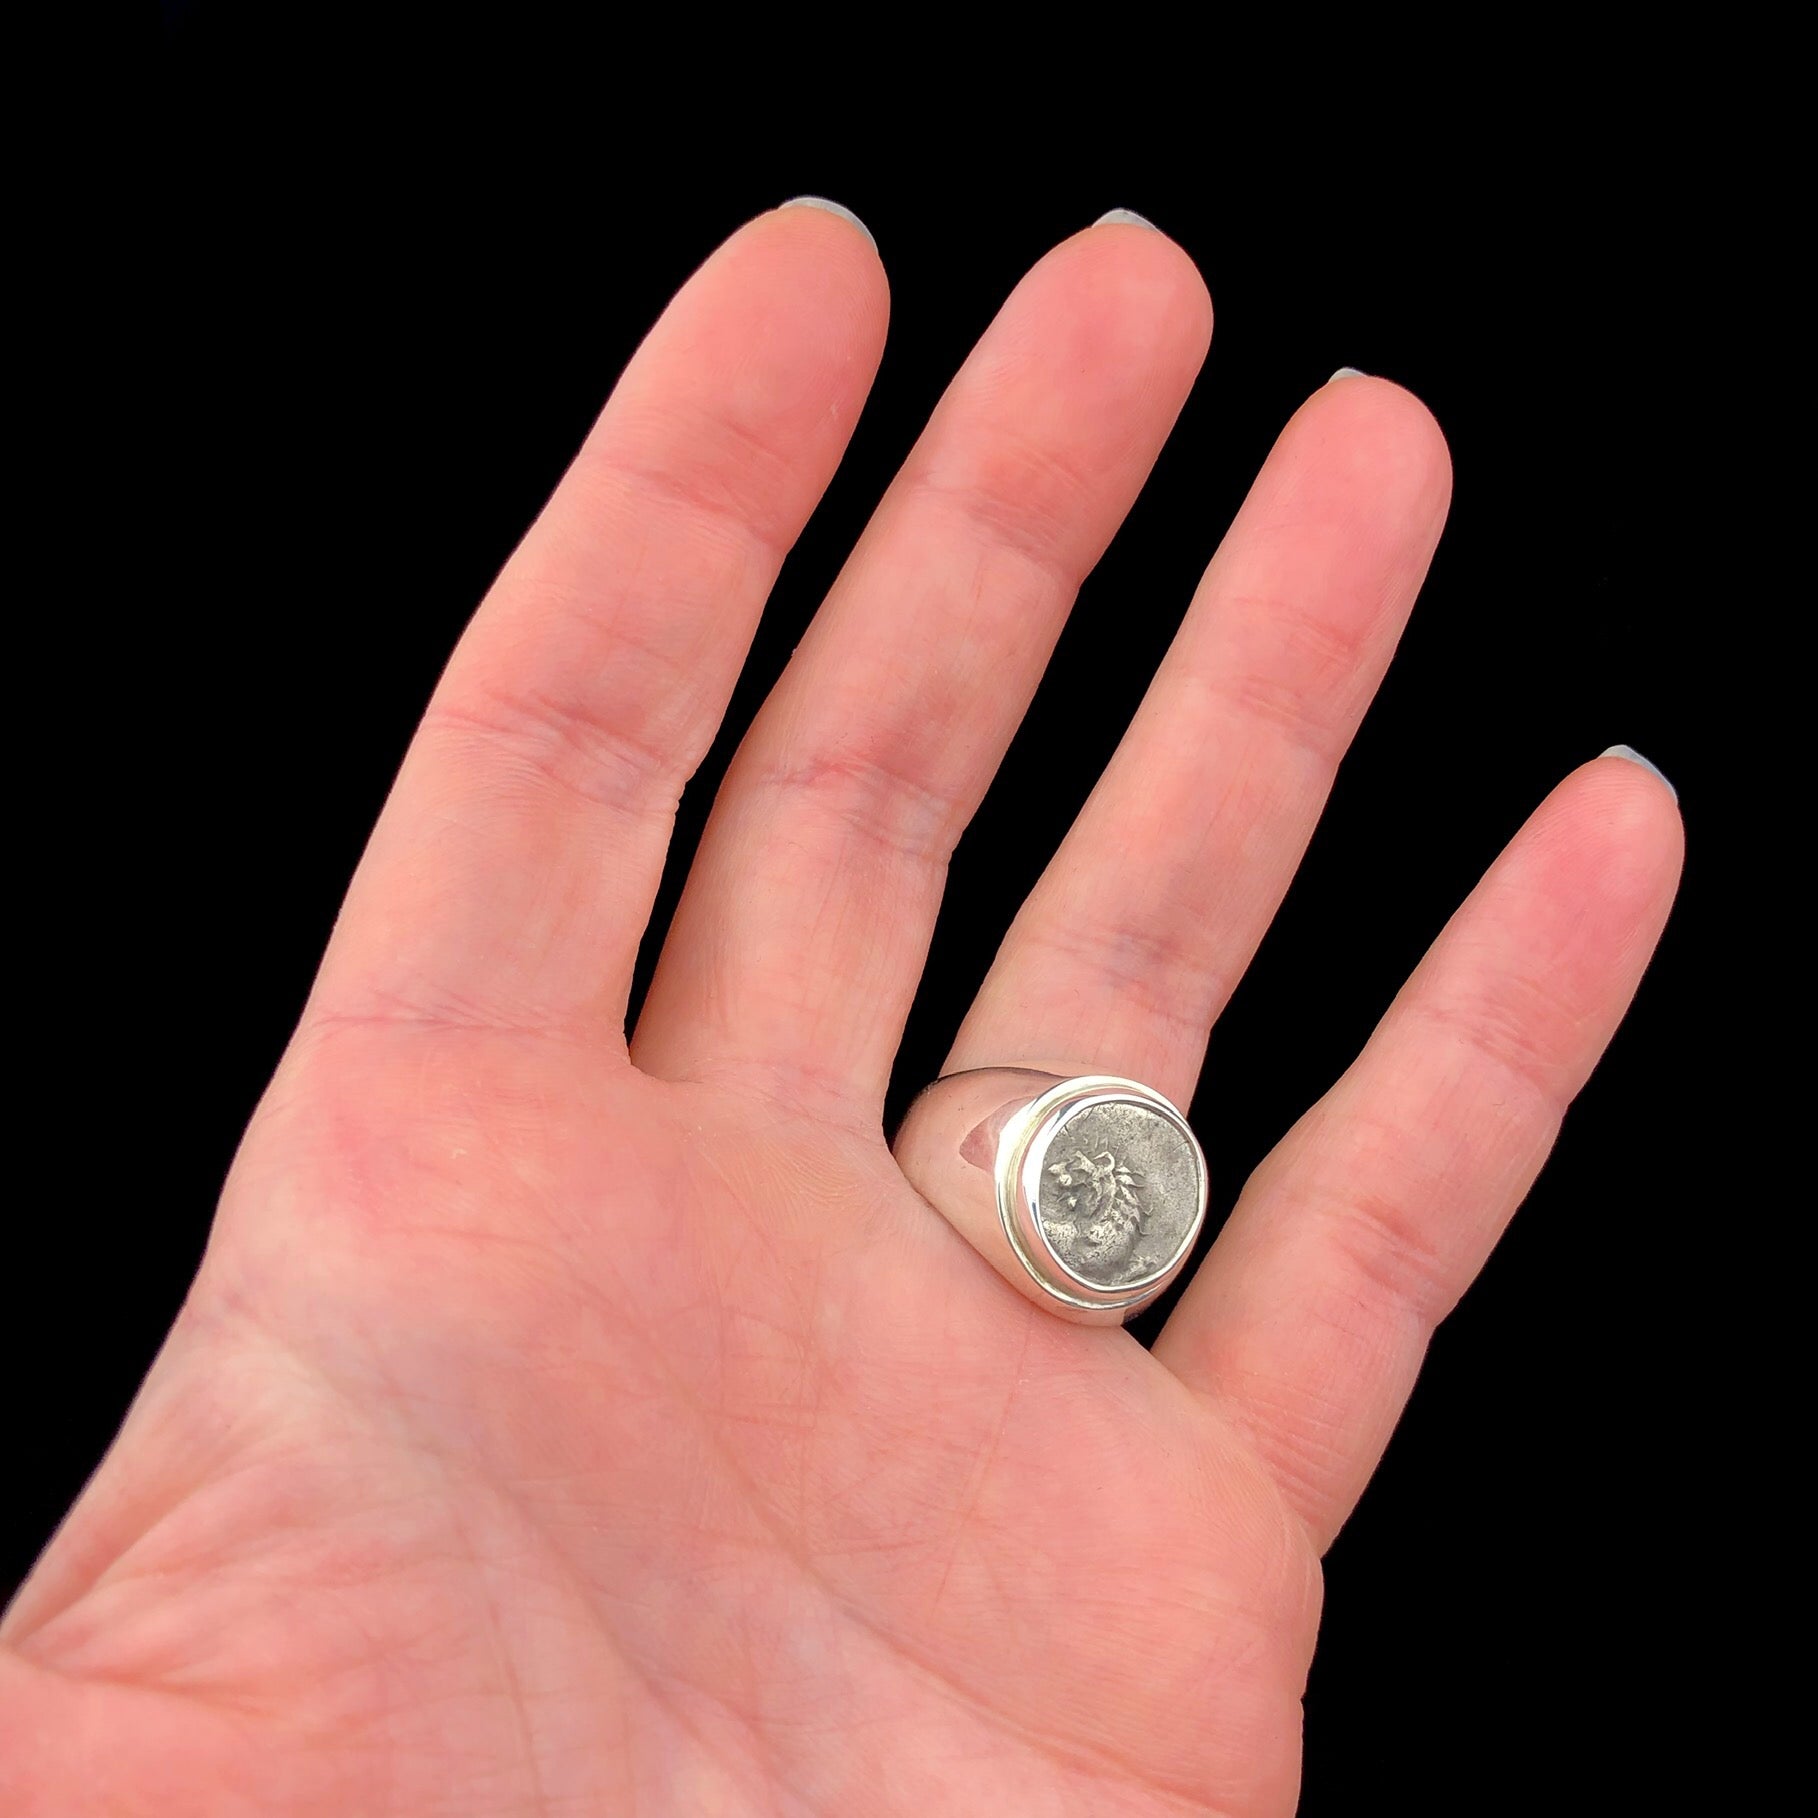 Lion Coin Ring shown on hand.